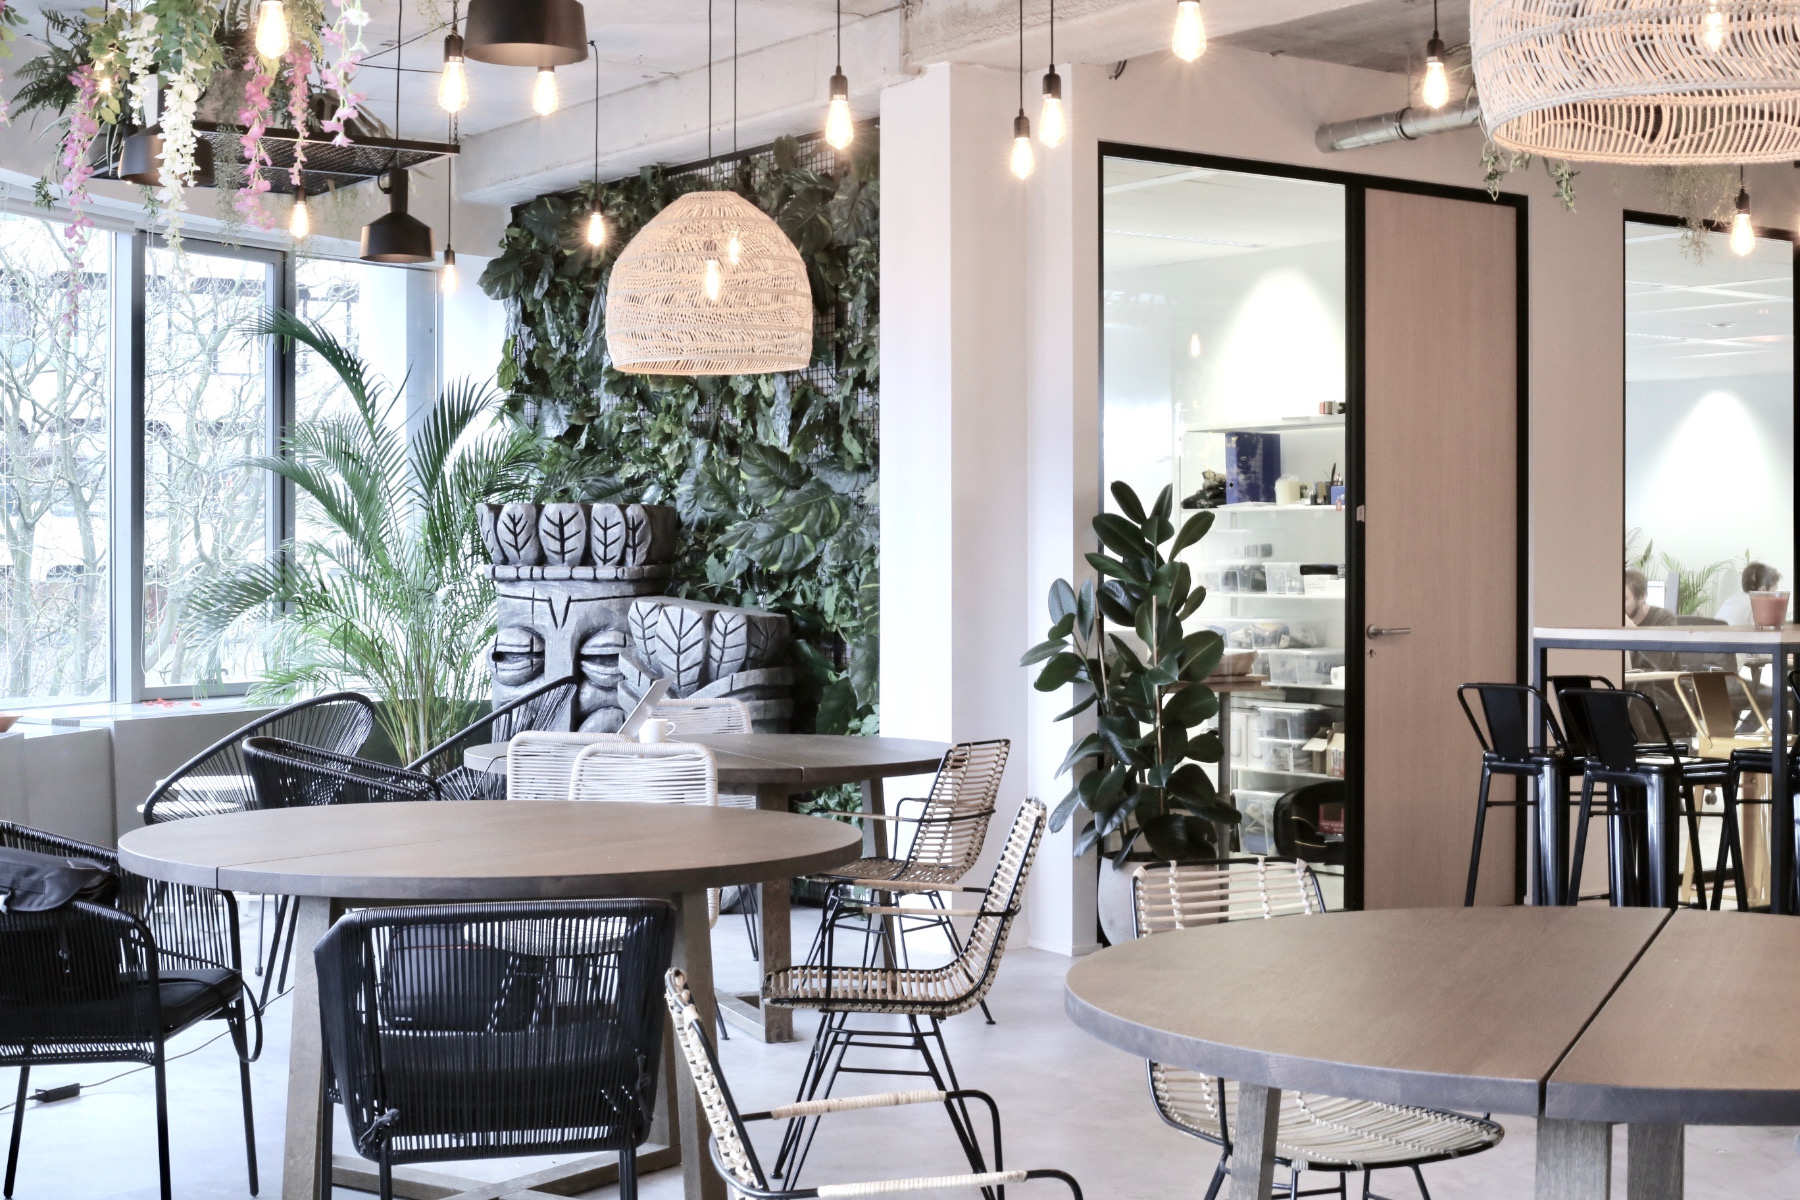 A Look Inside Hive5’s New Brussels Coworking Space